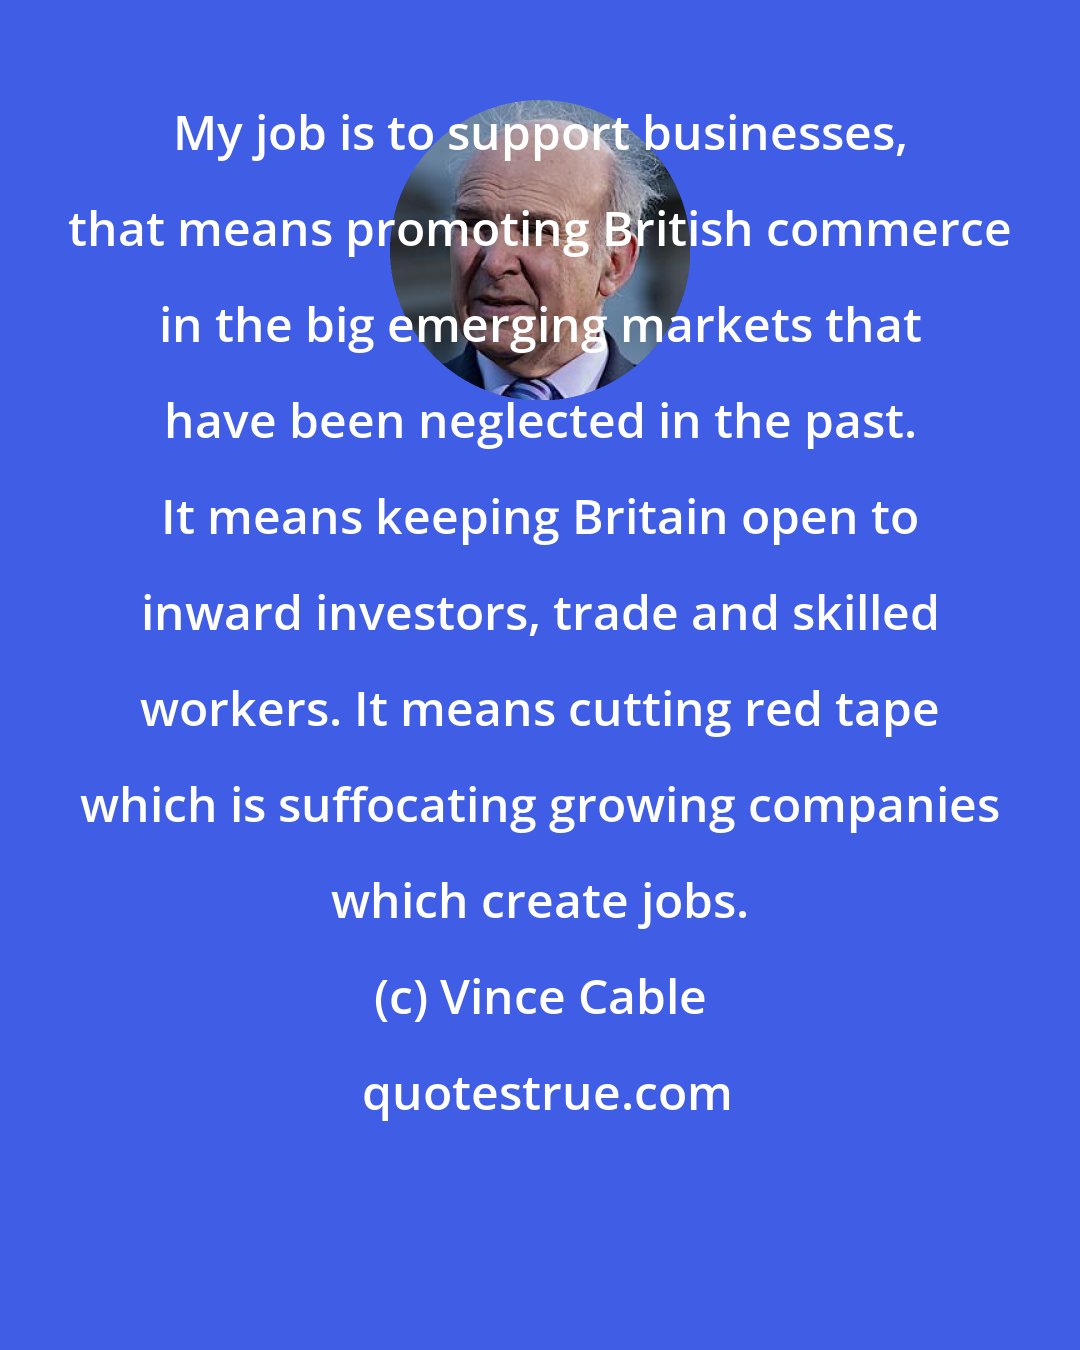 Vince Cable: My job is to support businesses, that means promoting British commerce in the big emerging markets that have been neglected in the past. It means keeping Britain open to inward investors, trade and skilled workers. It means cutting red tape which is suffocating growing companies which create jobs.